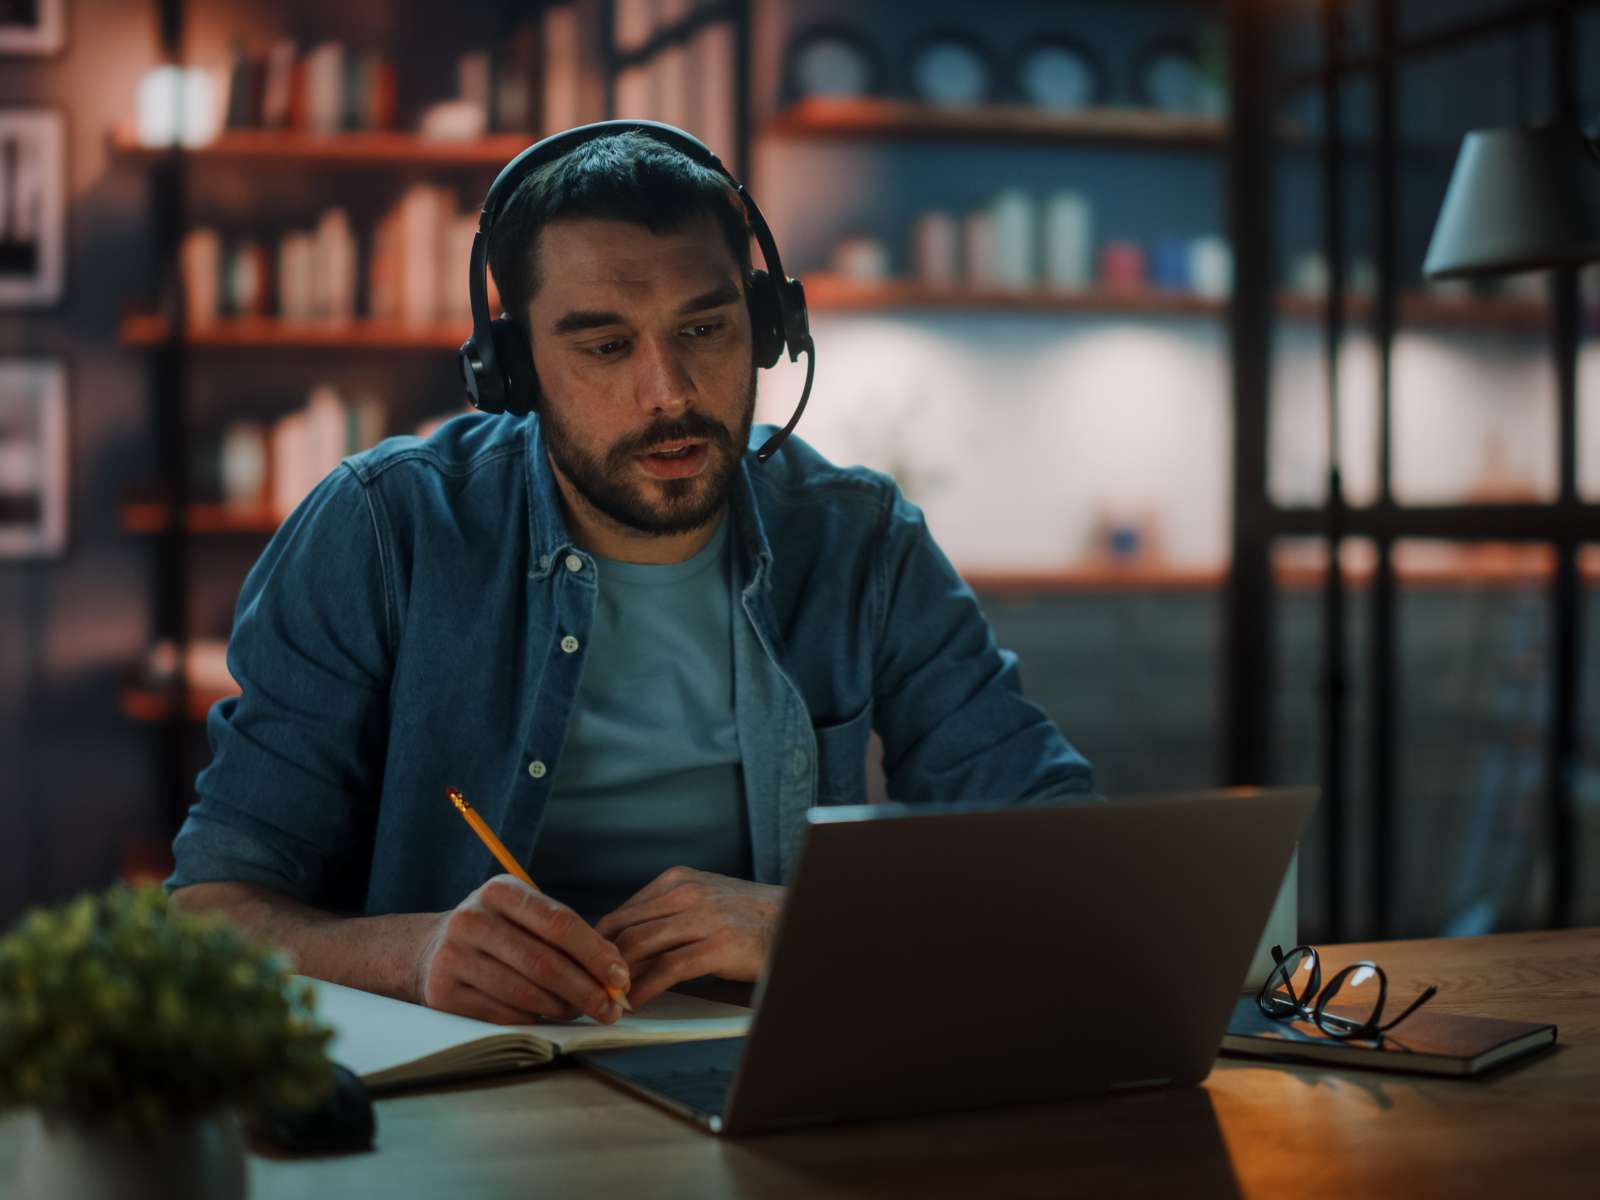 Man writing product descriptions with headphones on